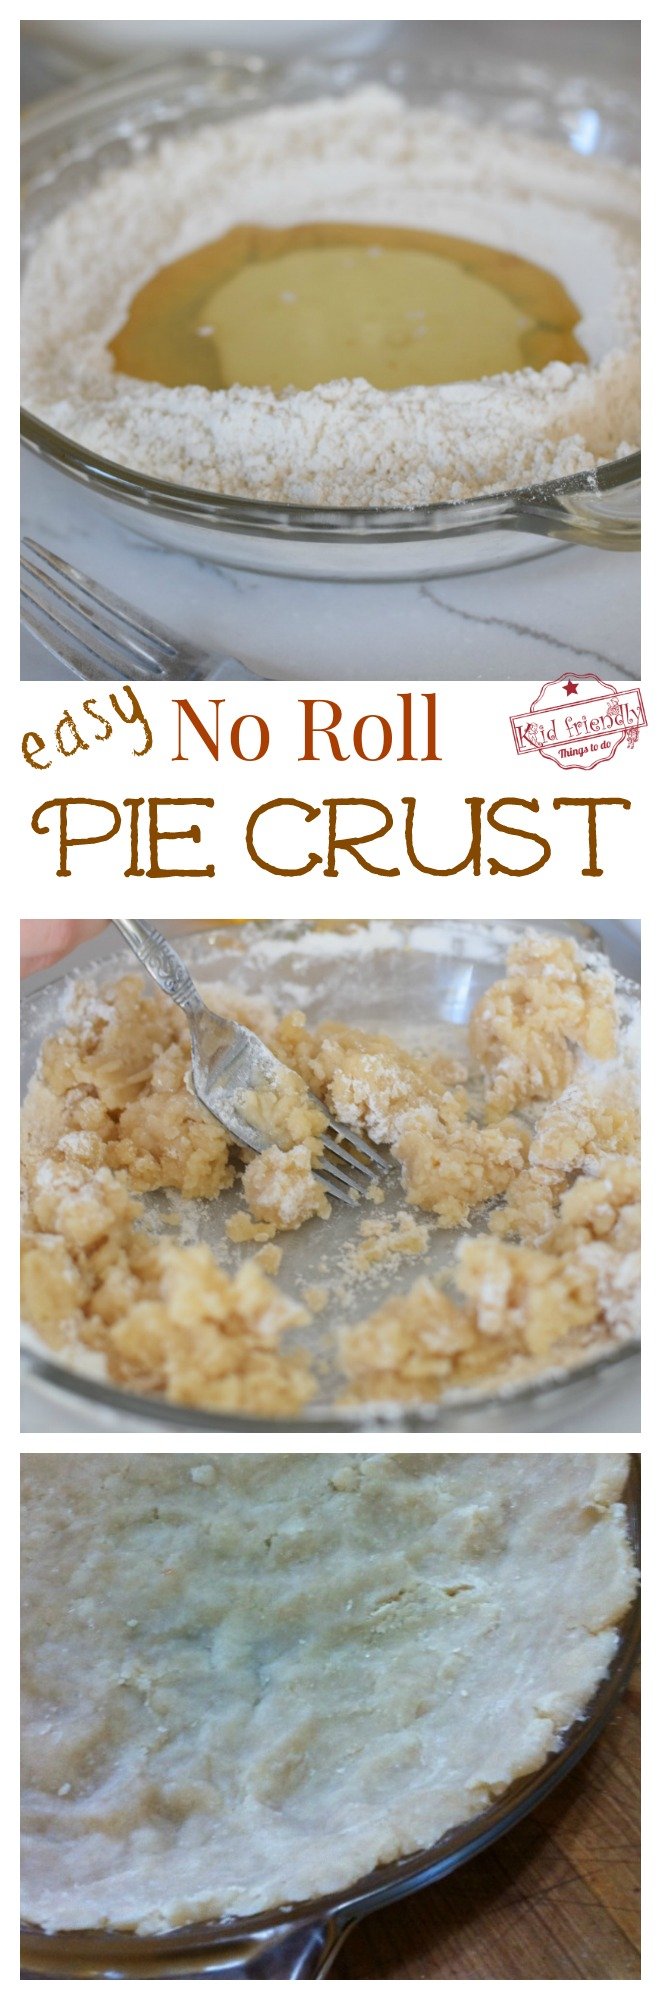 NO ROLL Pie Crust! Easy, flaky, delicious pie crust - perfect for holiday baking. www.kidfriendlythingstodo.com